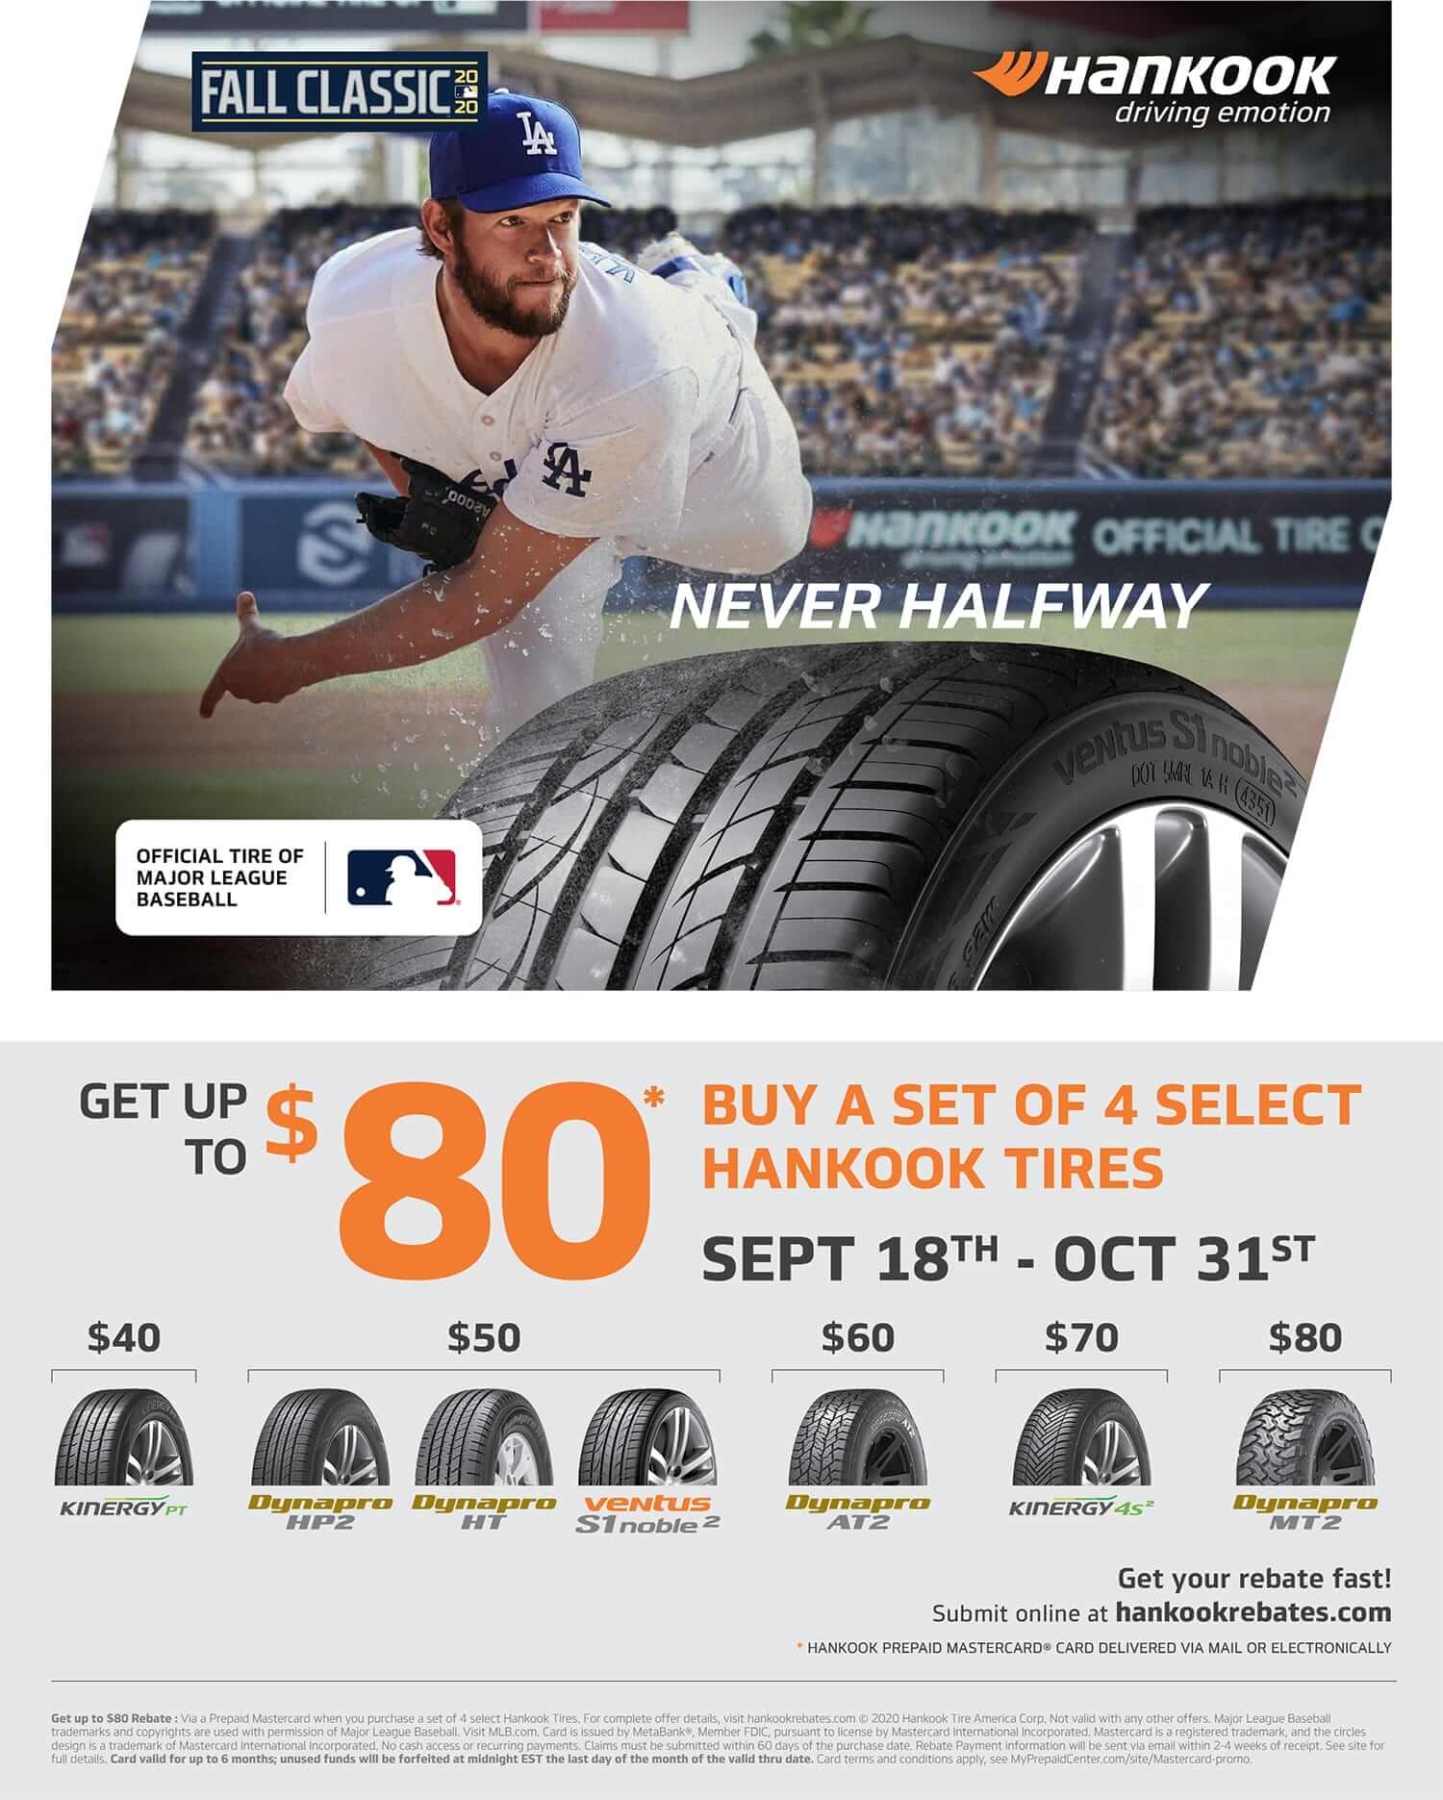 hankook-tire-offers-savings-of-up-to-80-w-2020-fall-classic-rebate